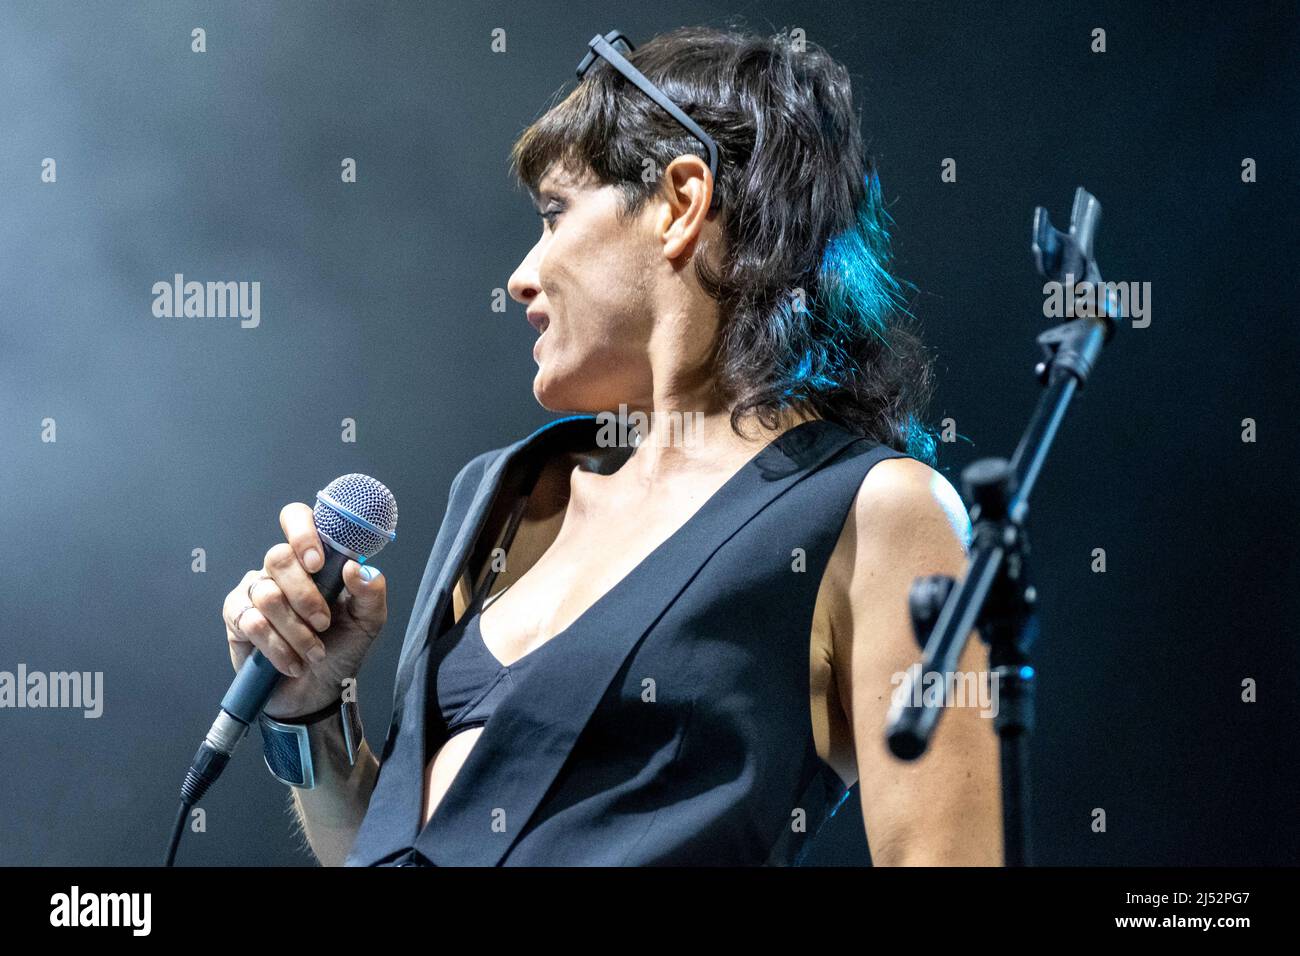 Verona, Italy. 30 June 2021. Picture shows Petra Magoni during the  performance at Teatro Romano in Verona for Rumors Festival 2021 Stock Photo  - Alamy